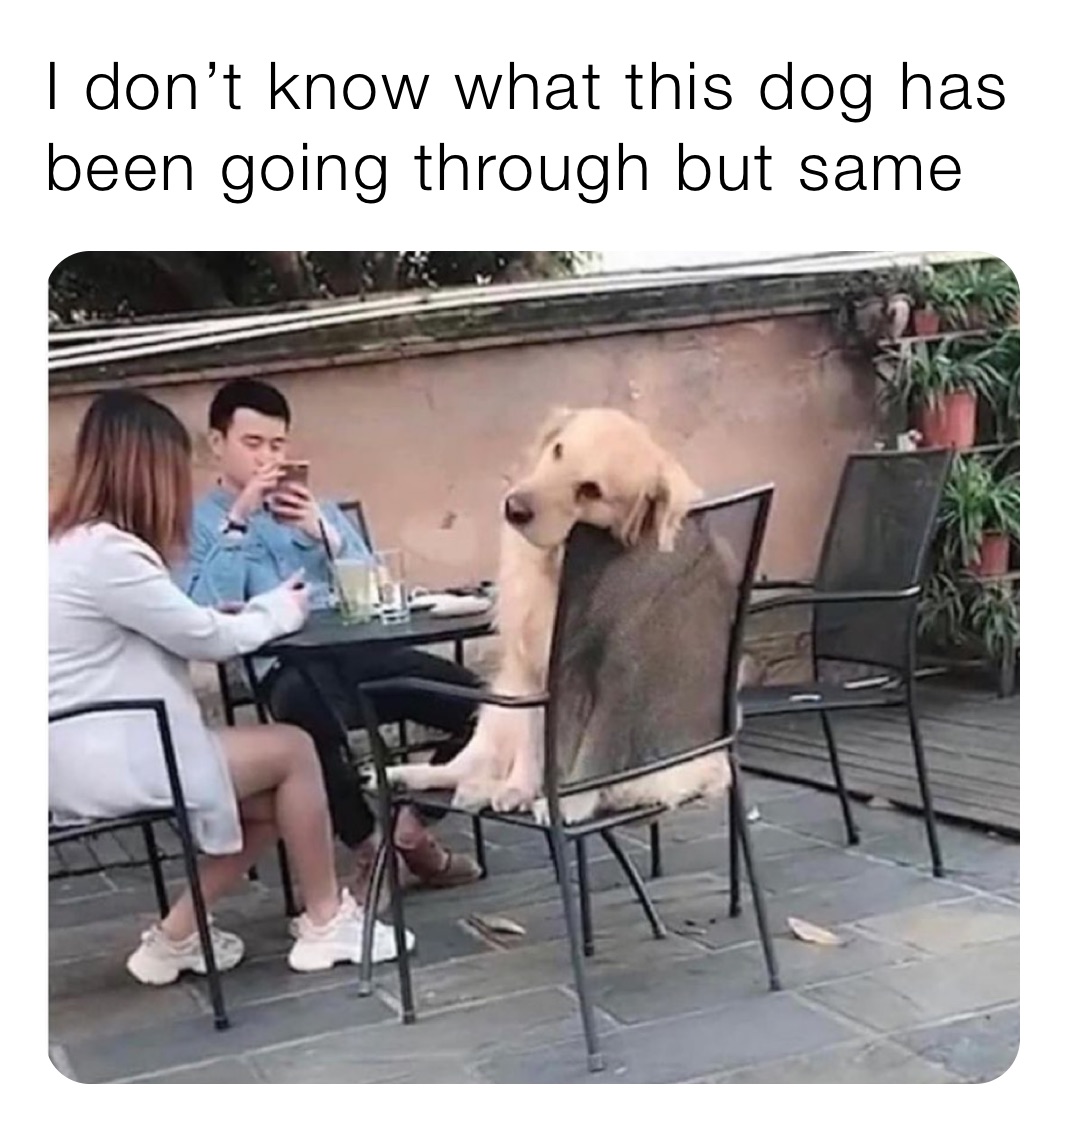 I don’t know what this dog has been going through but same